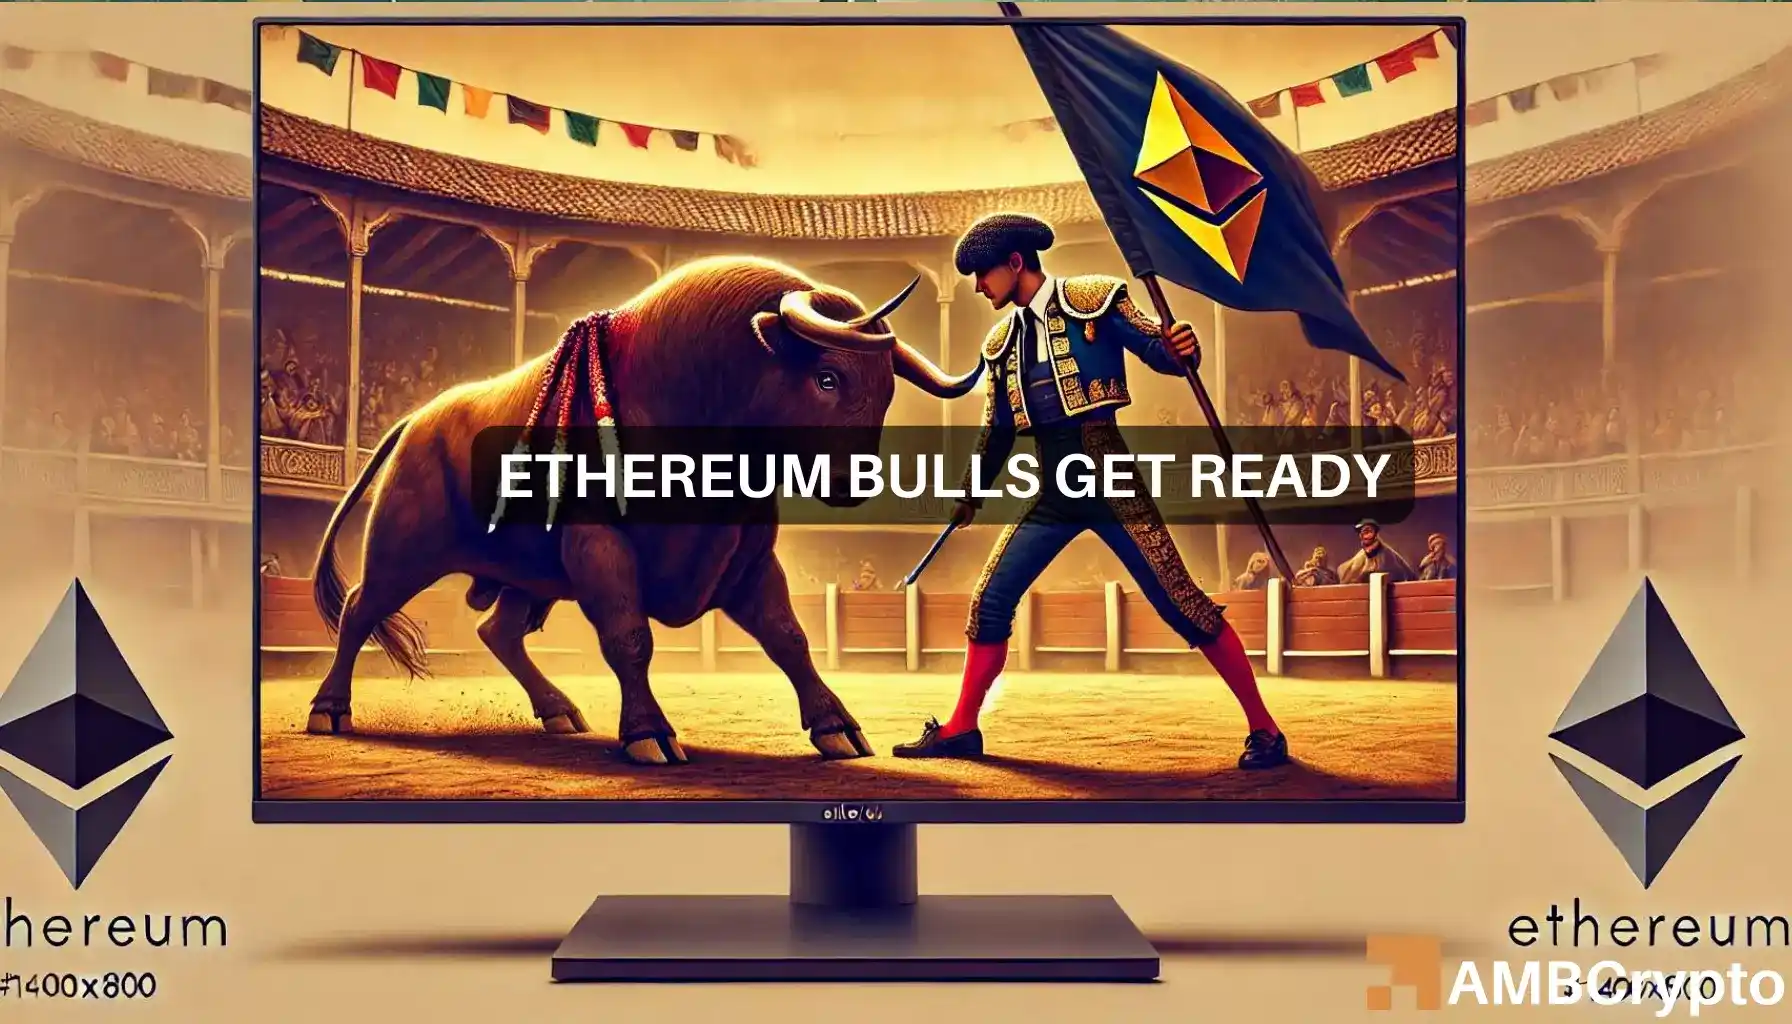 Ethereum's bull run: Traders show confidence as ETH's price climbs